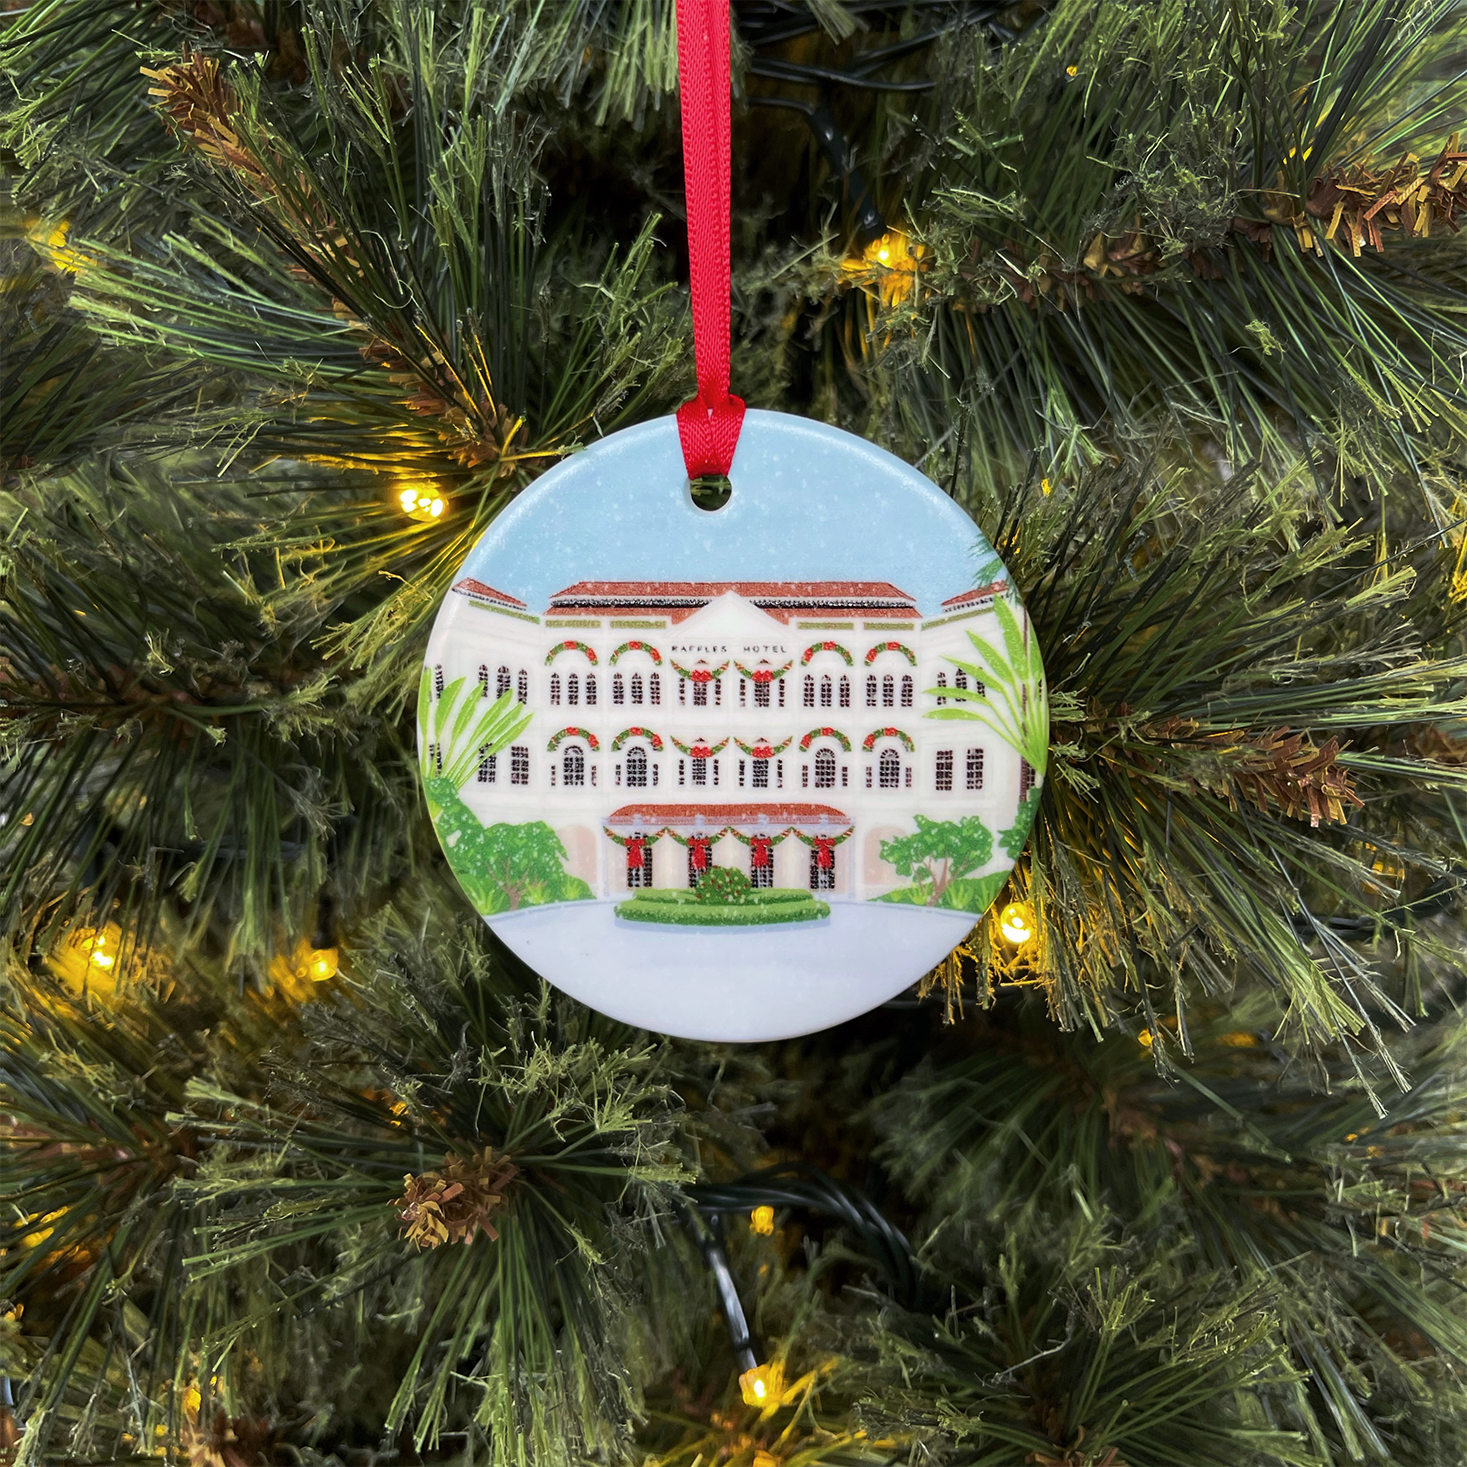 Singapore Christmas Ornament featuring Raffles Hotel hanging from a red ribbon on a Christmas tree